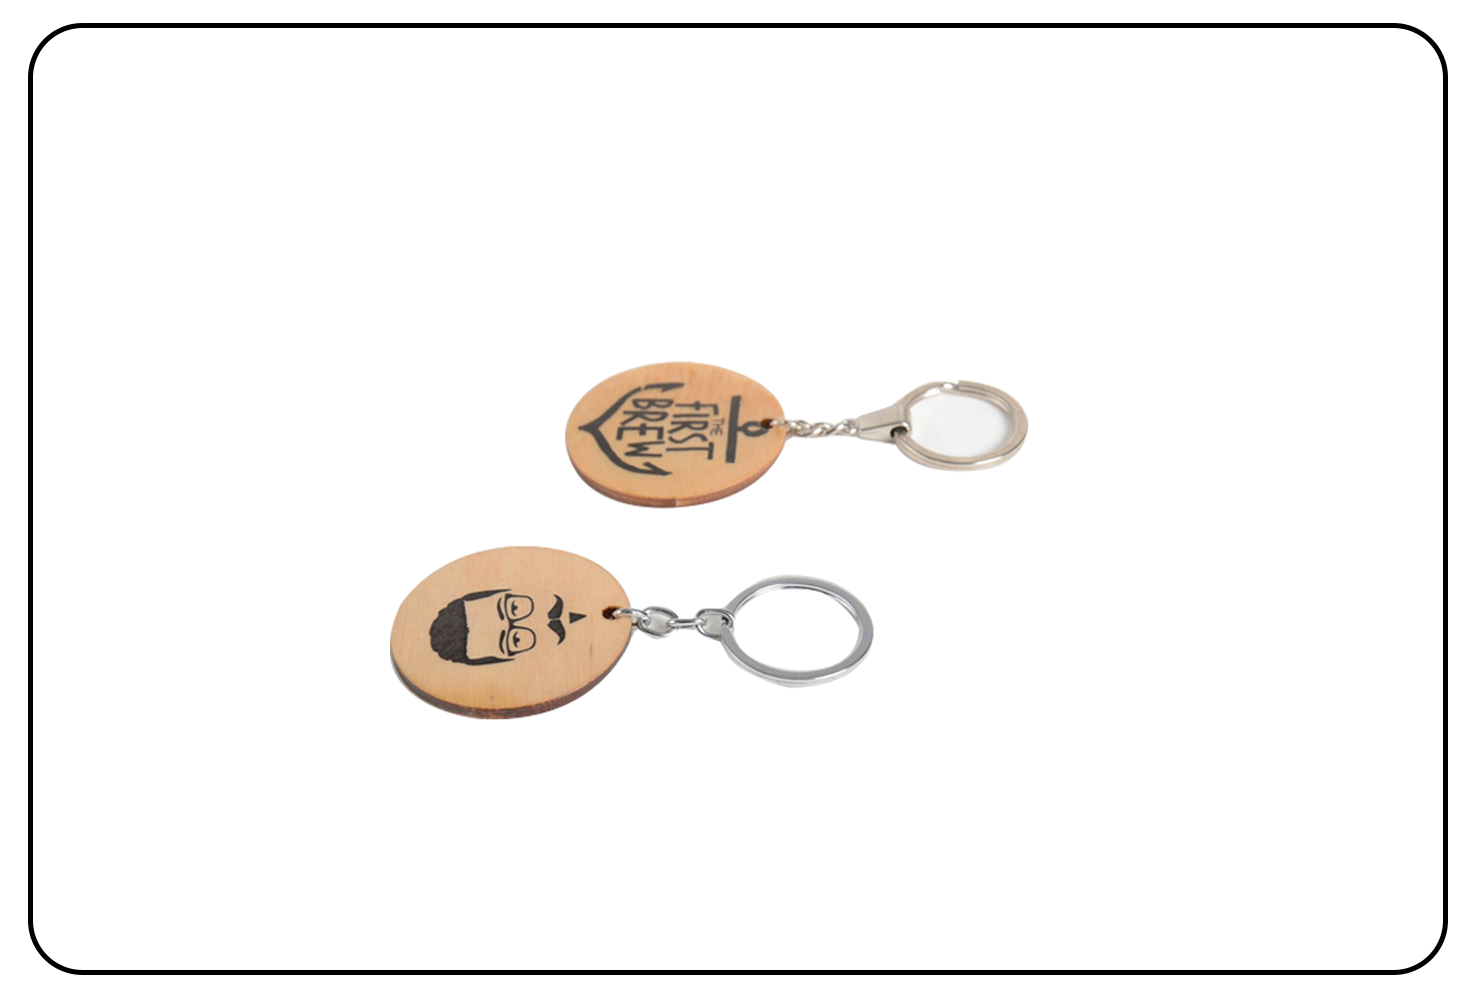 Customized keychain for unique personalization.